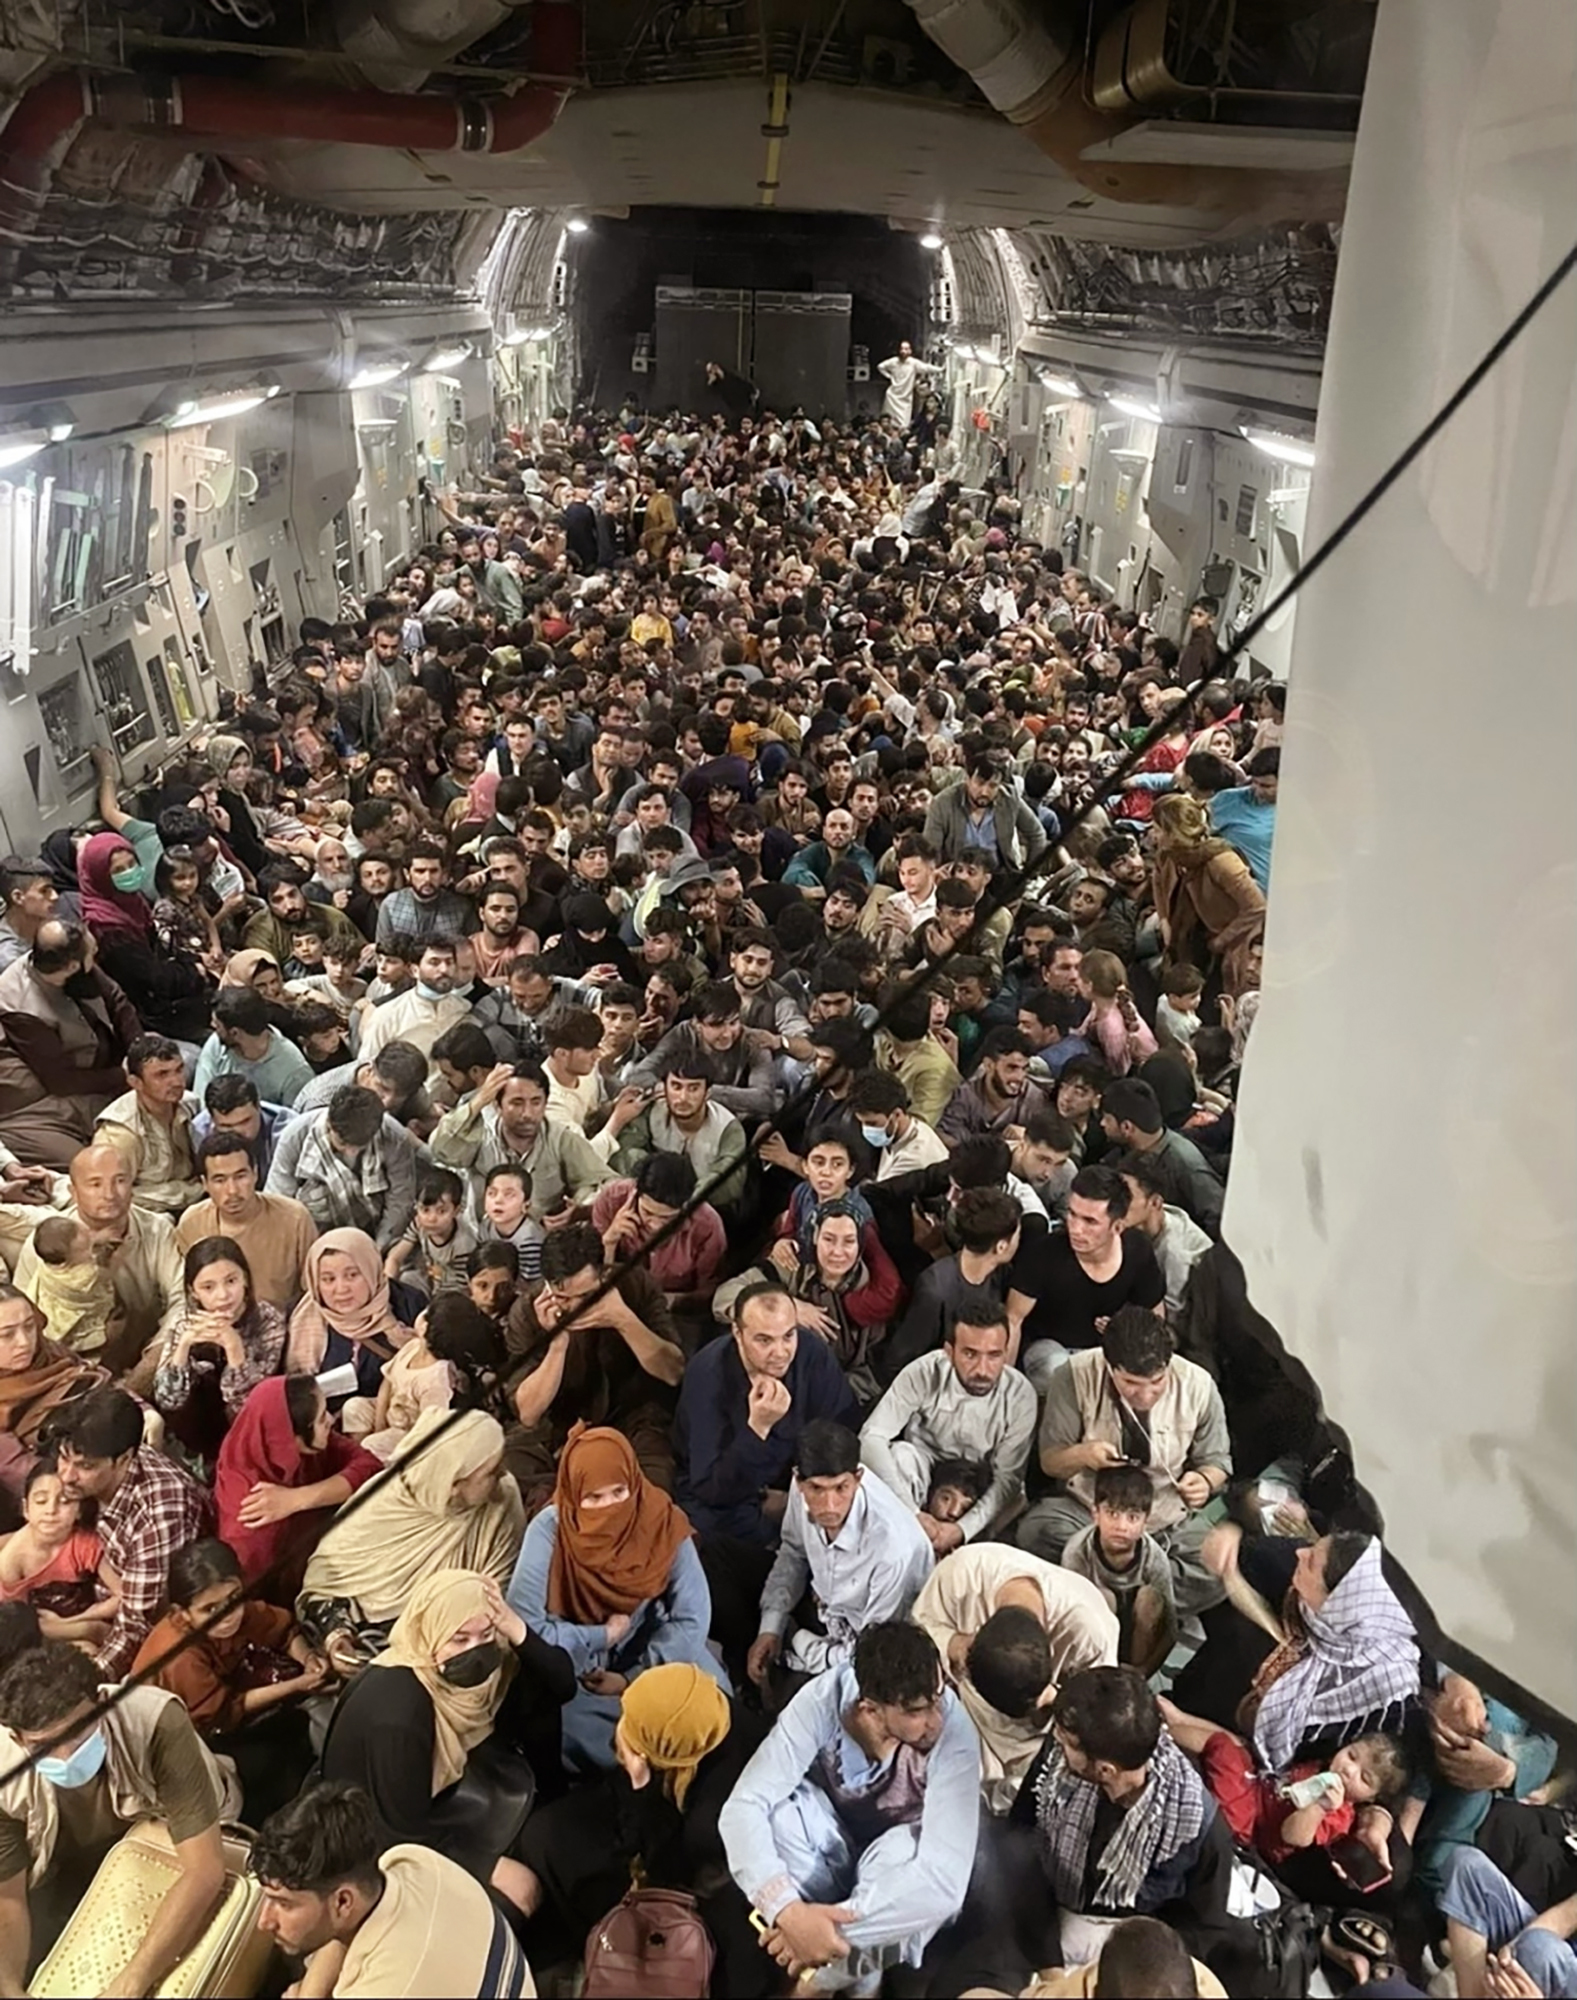 Afghan citizens pack inside a U.S. Air Force C-17 Globemaster III, as they are transported from from Hamid Karzai International Airport in Afghanistan, Sunday, Aug. 15, 2021. The Taliban on Sunday swept into Kabul, the Afghan capital, after capturing most of Afghanistan. (Capt. Chris Herbert/U.S. Air Force via AP)